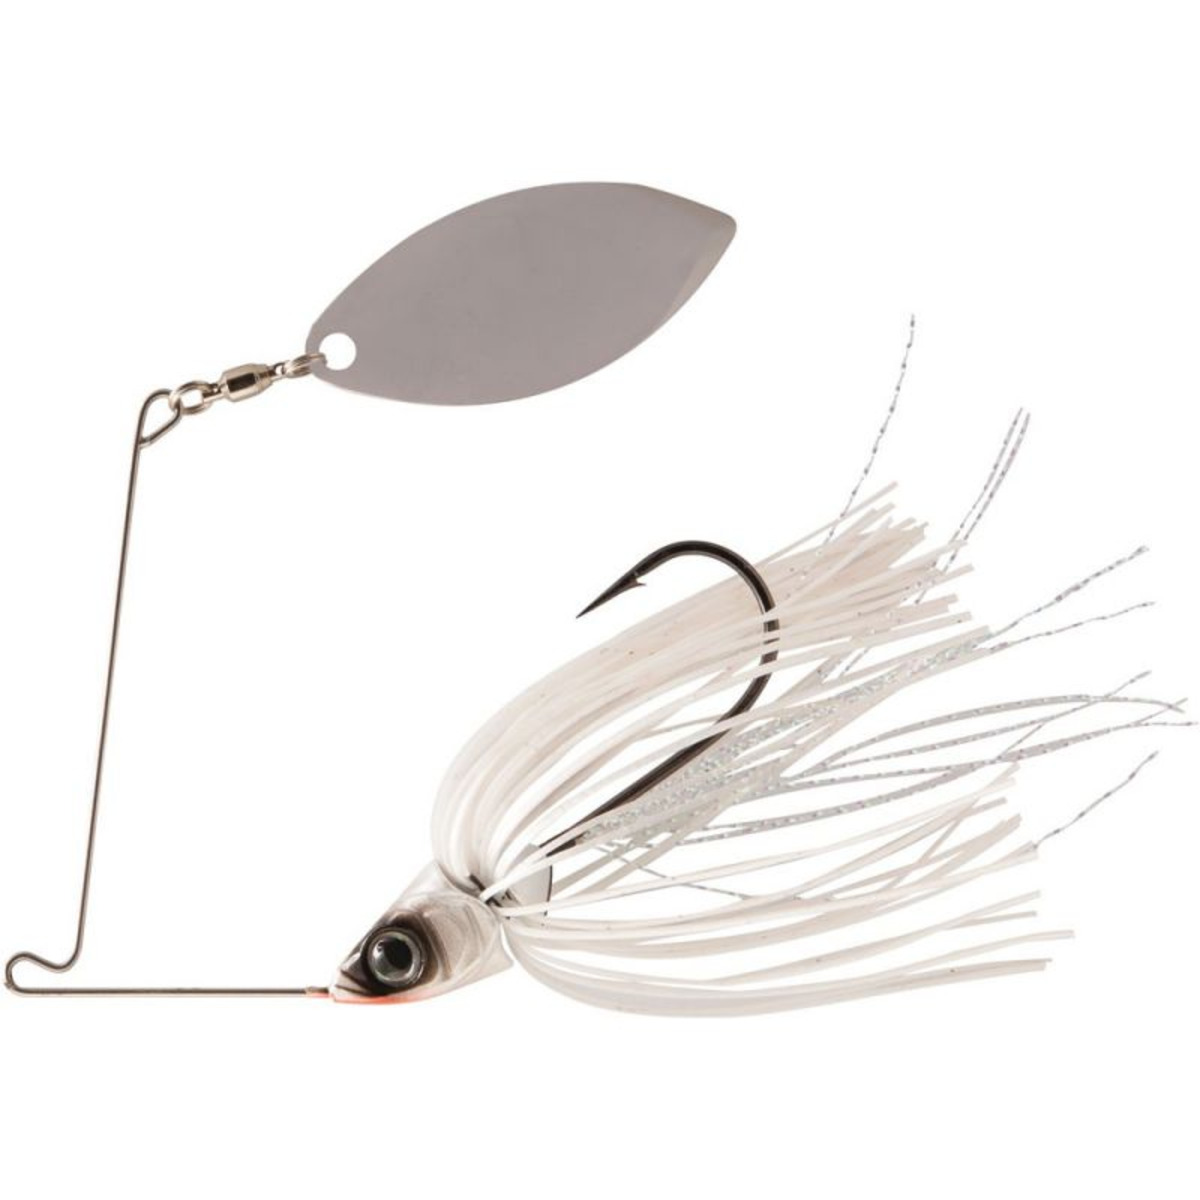 Rapture Sharp Spin Single Willow - 7.0 g - White Shad